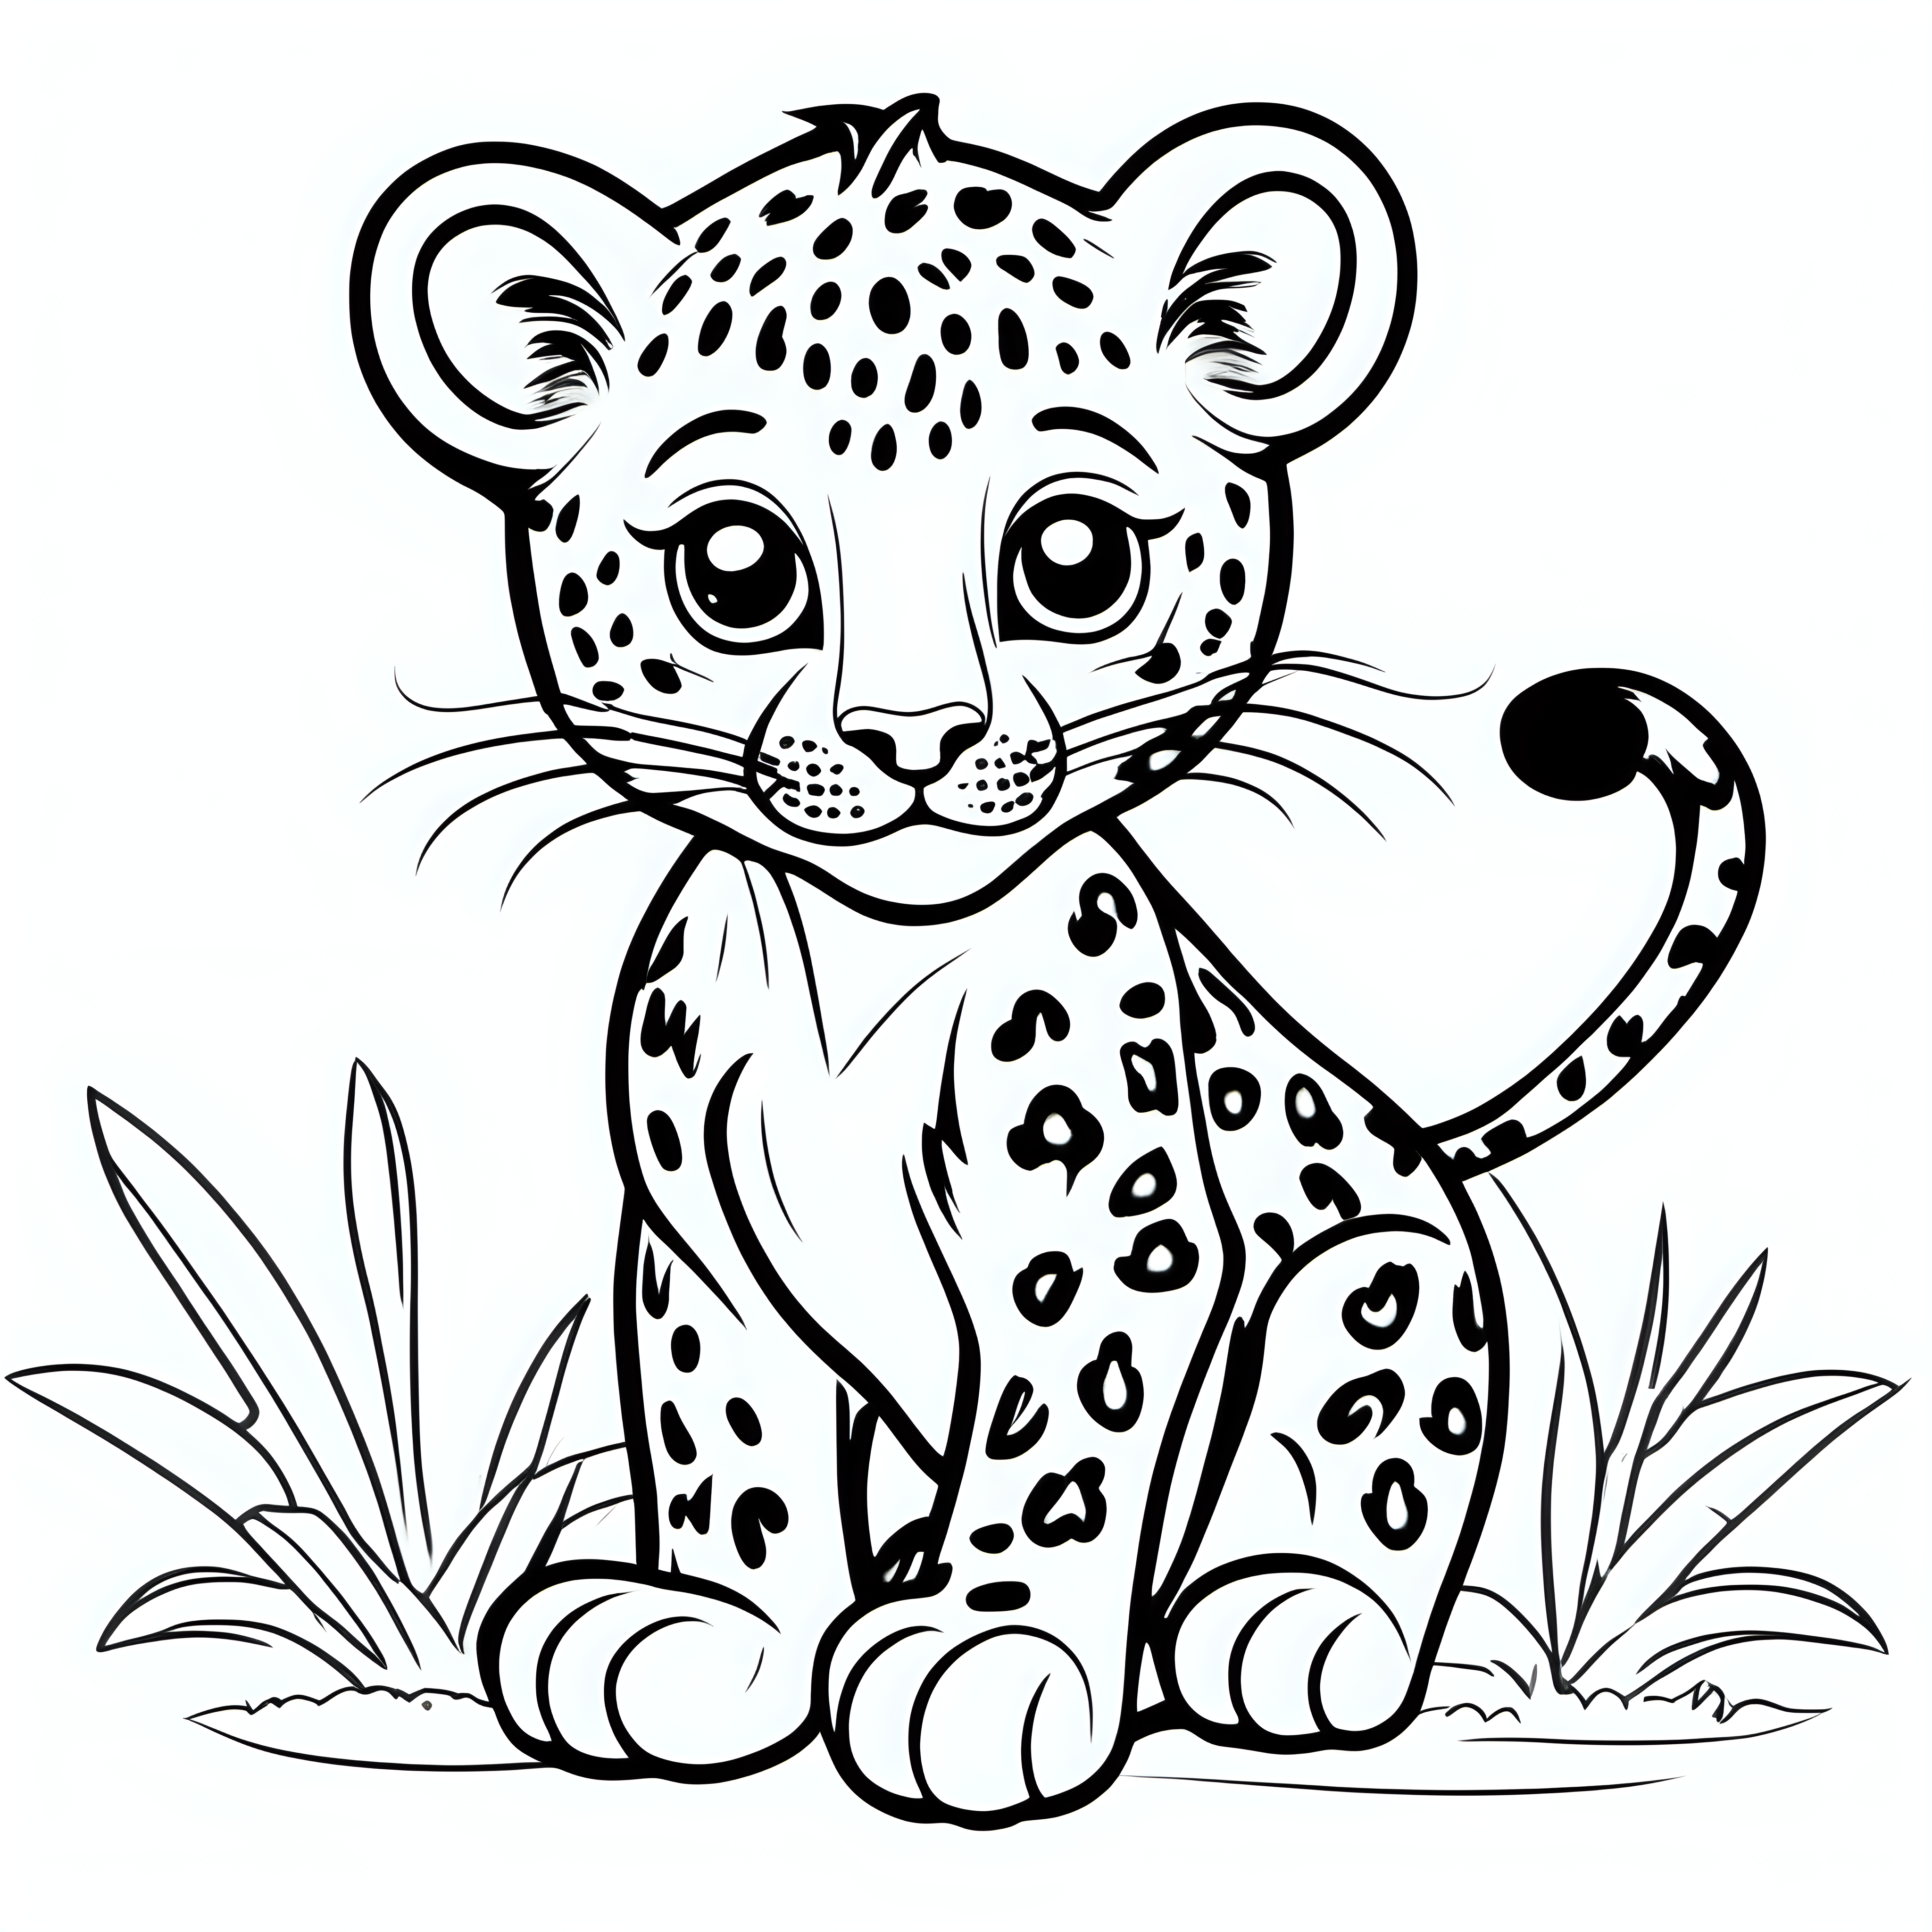 draw a cute baby leopard with only the